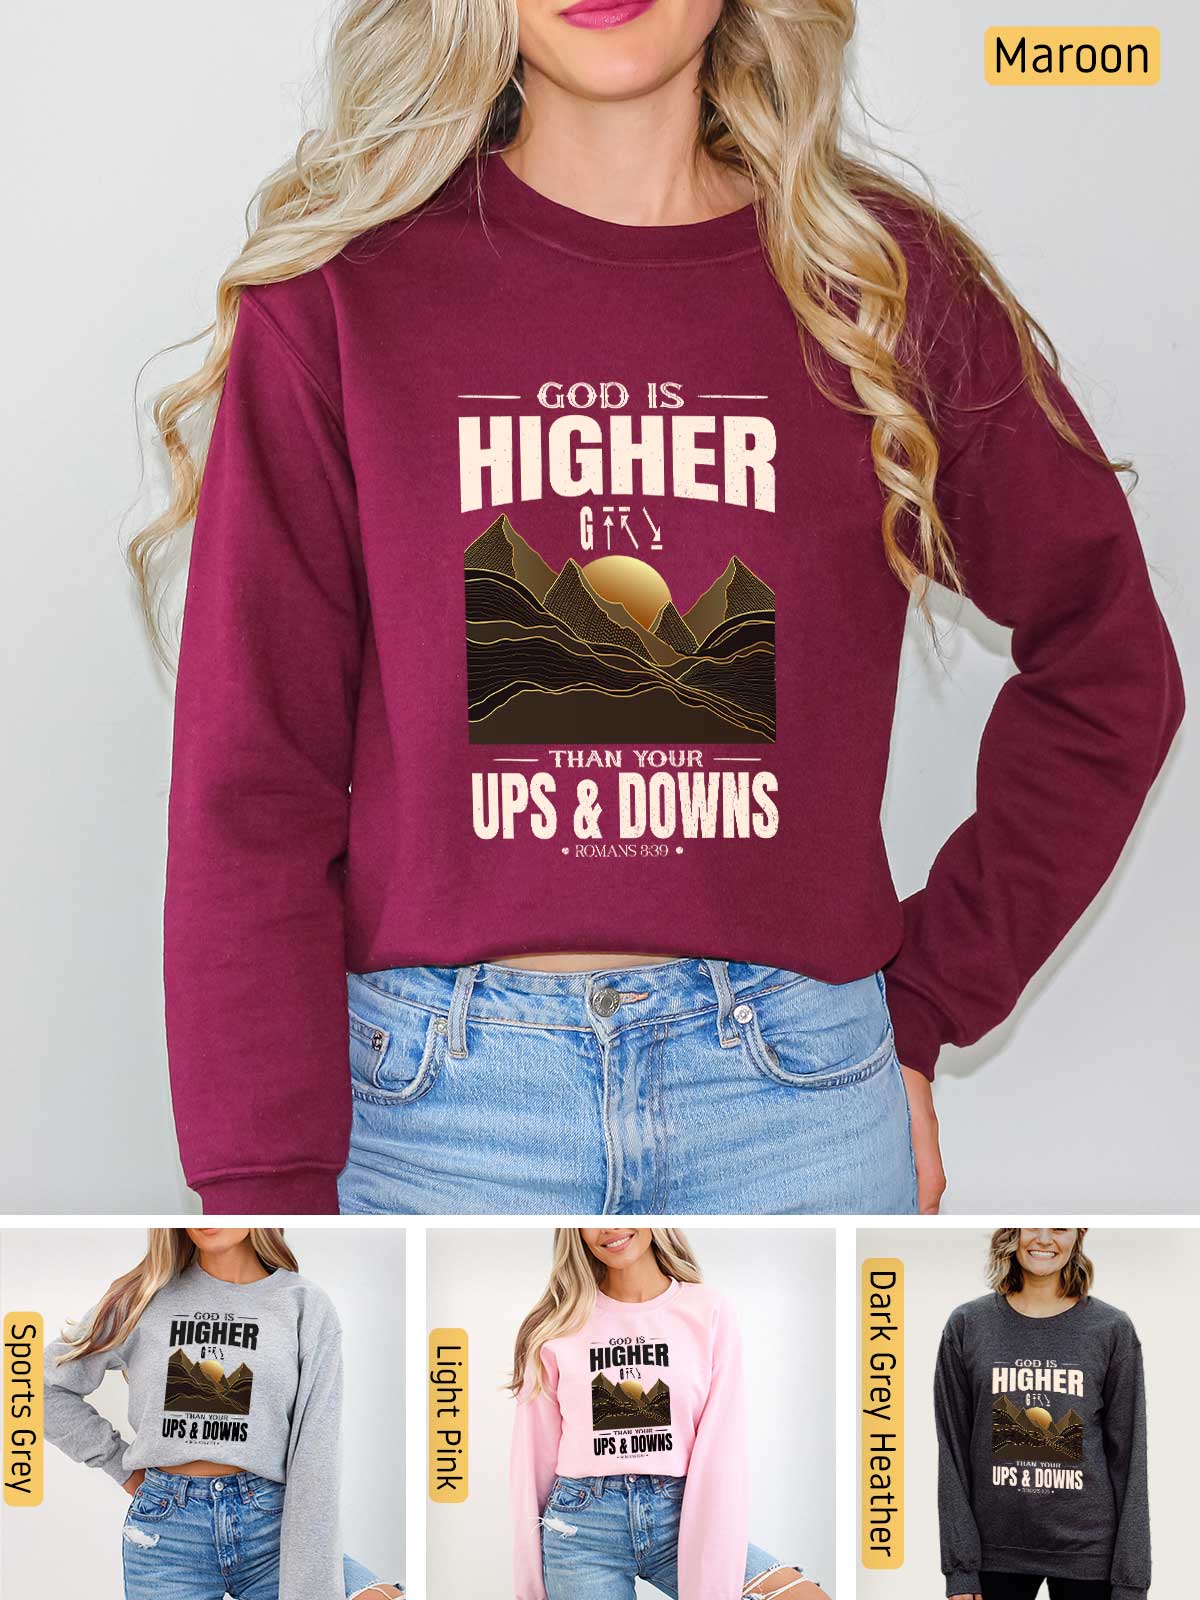 a woman wearing a sweatshirt that says god is higher than ups and downs